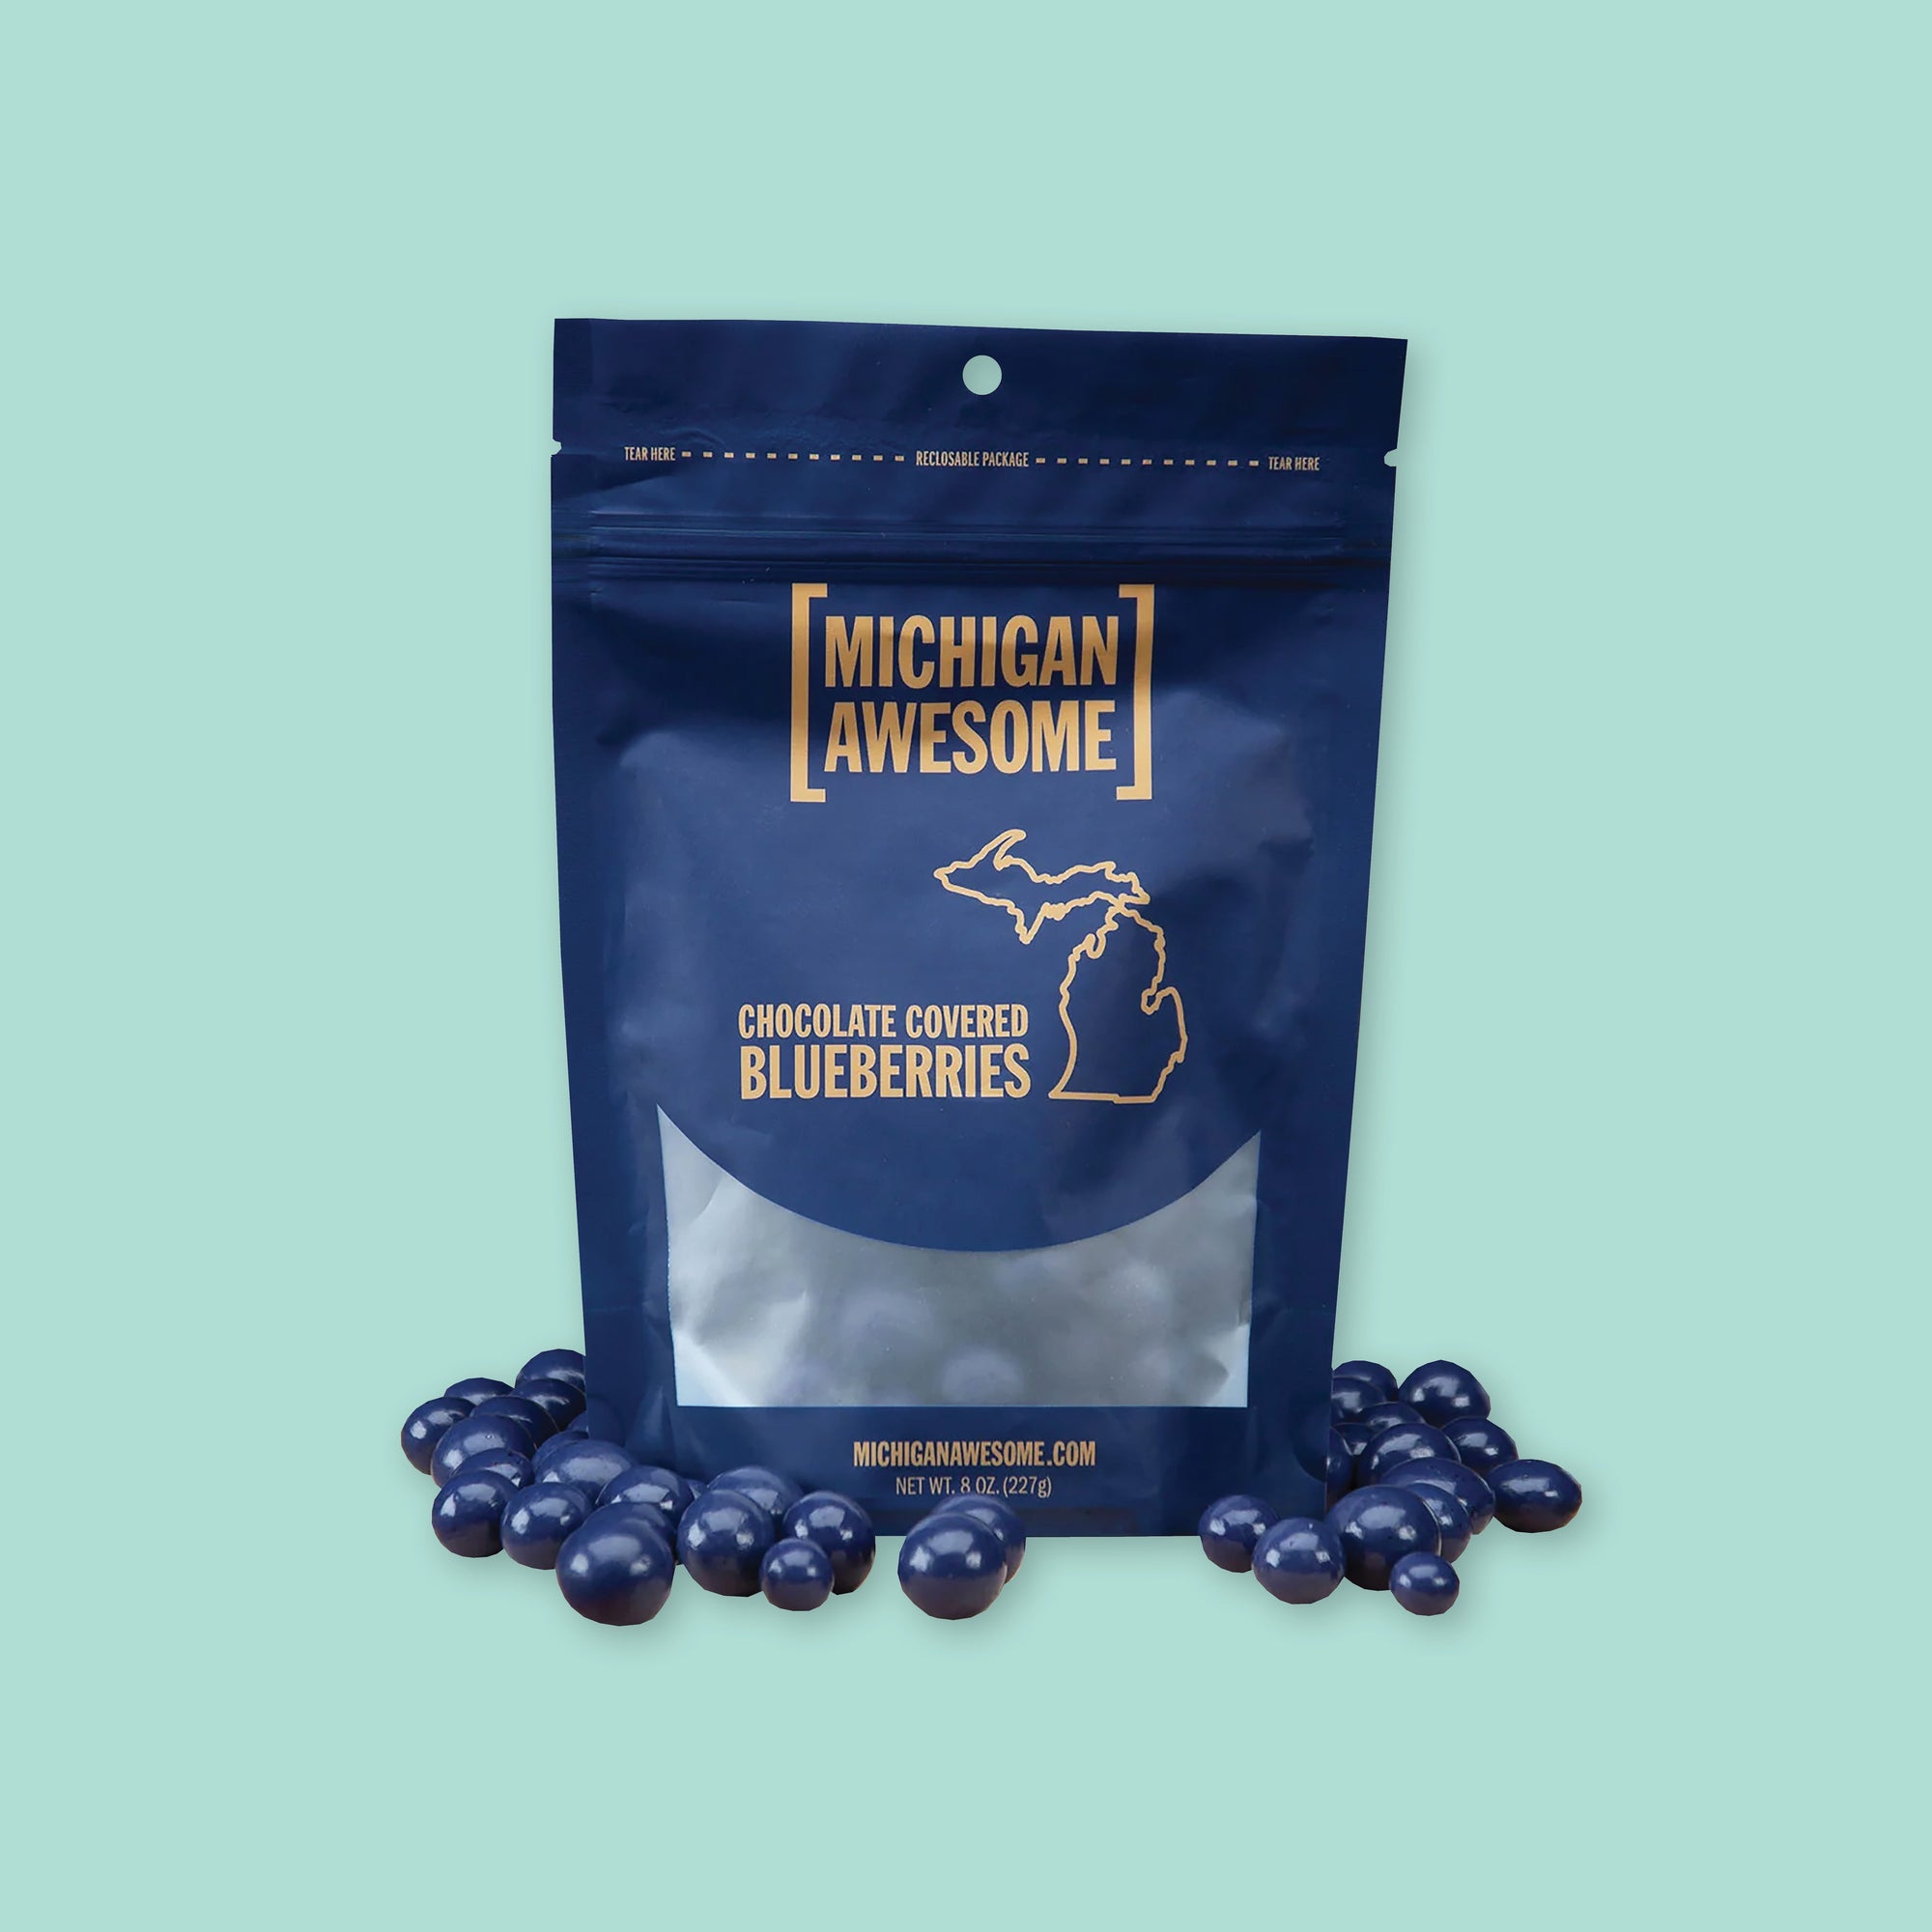 On a mint green background sits a navy package that is see-through at the bottom. It is filled with chocolate covered blueberries. It says "MICHIGAN AWESOME," and "CHOCOLATE COVERED BLUEBERRIES" in goldish-yellow, all caps block font. It has an outlined illustration of the state of Michigan-UP.There are chocolate covered blueberries sitting around the bag. NET WT. 8 OZ. (227G)